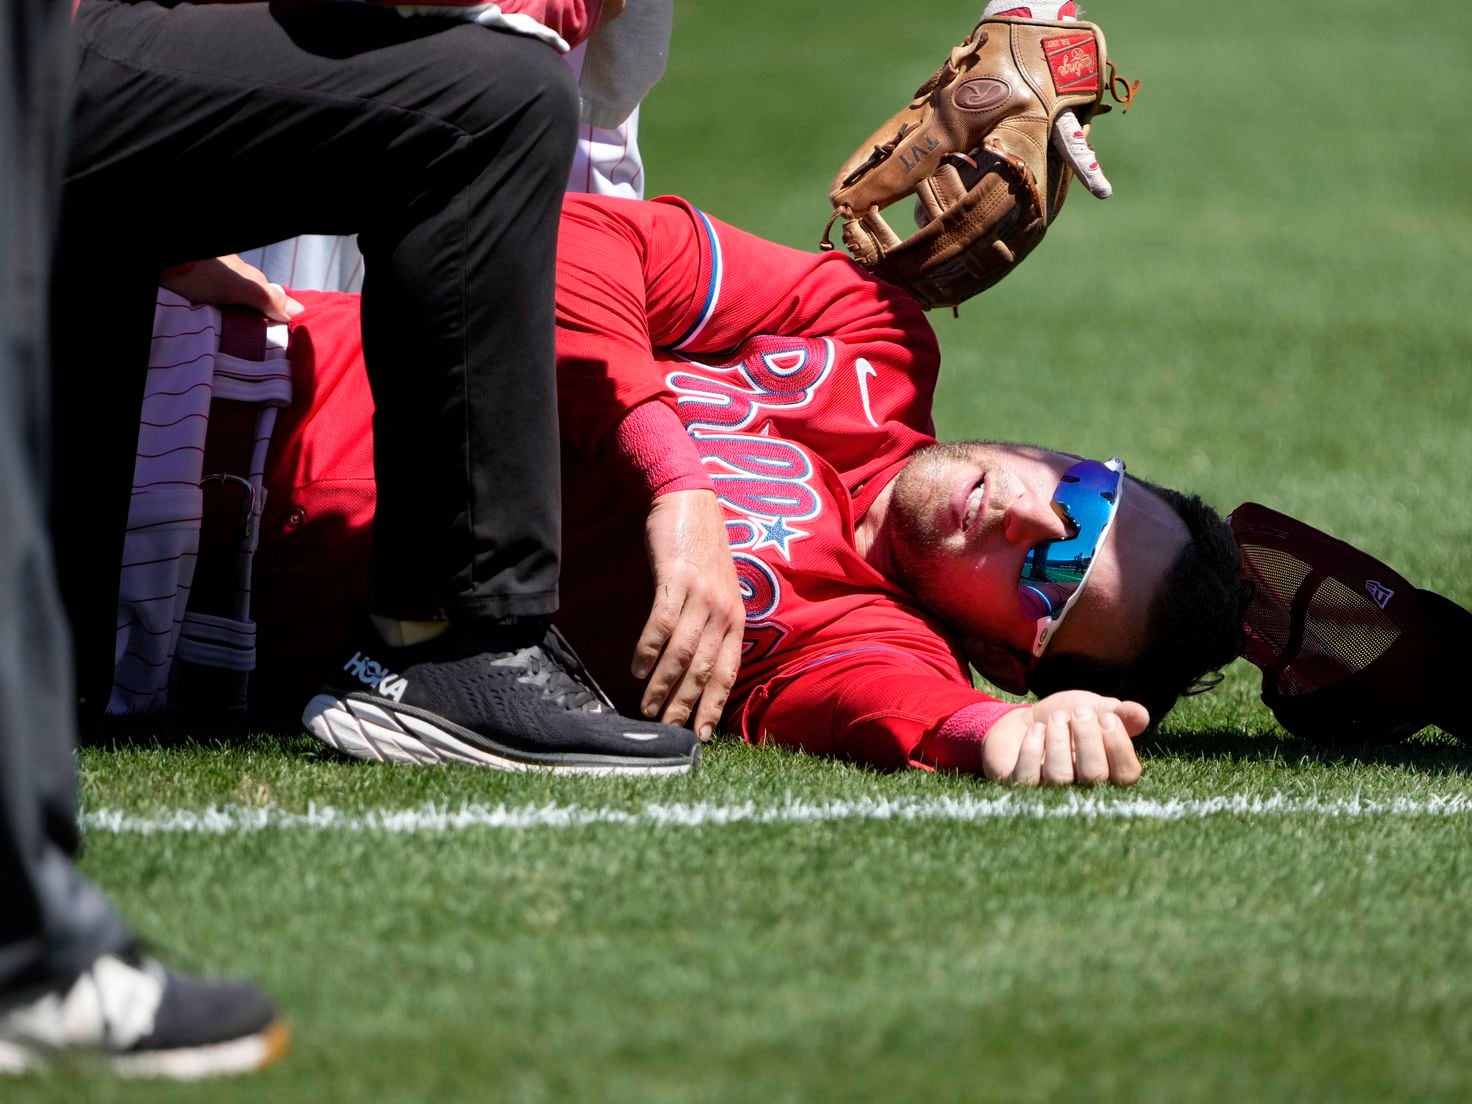 Rhys Hoskins suffers ACL Tear: Who will the Phillies choose to replace him?  – Philly Sports